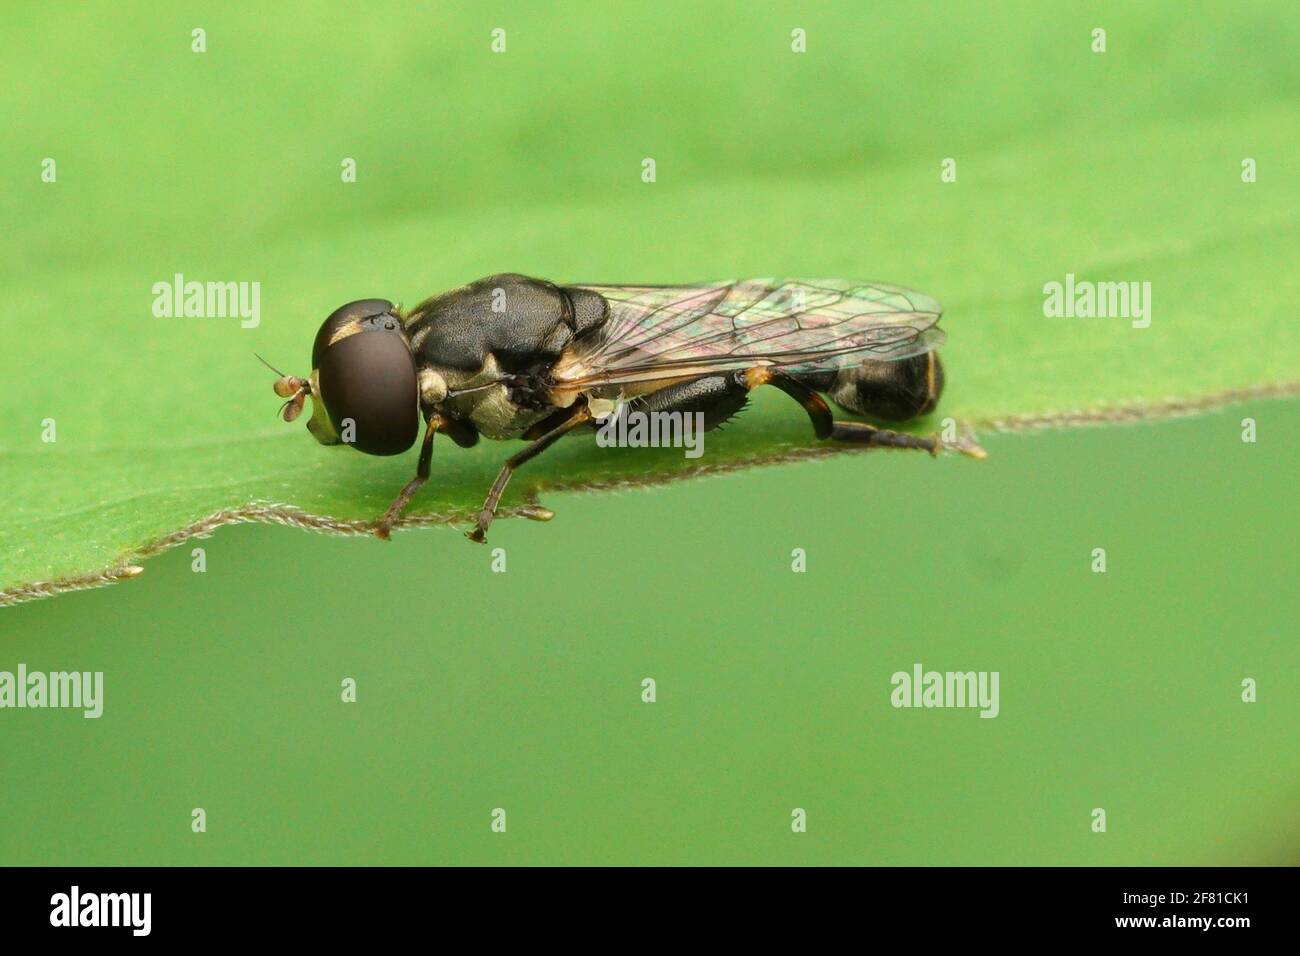 Closeup of the small Thick legged Hoverfly, Syritta pipiens sitting on a green leaf Stock Photo